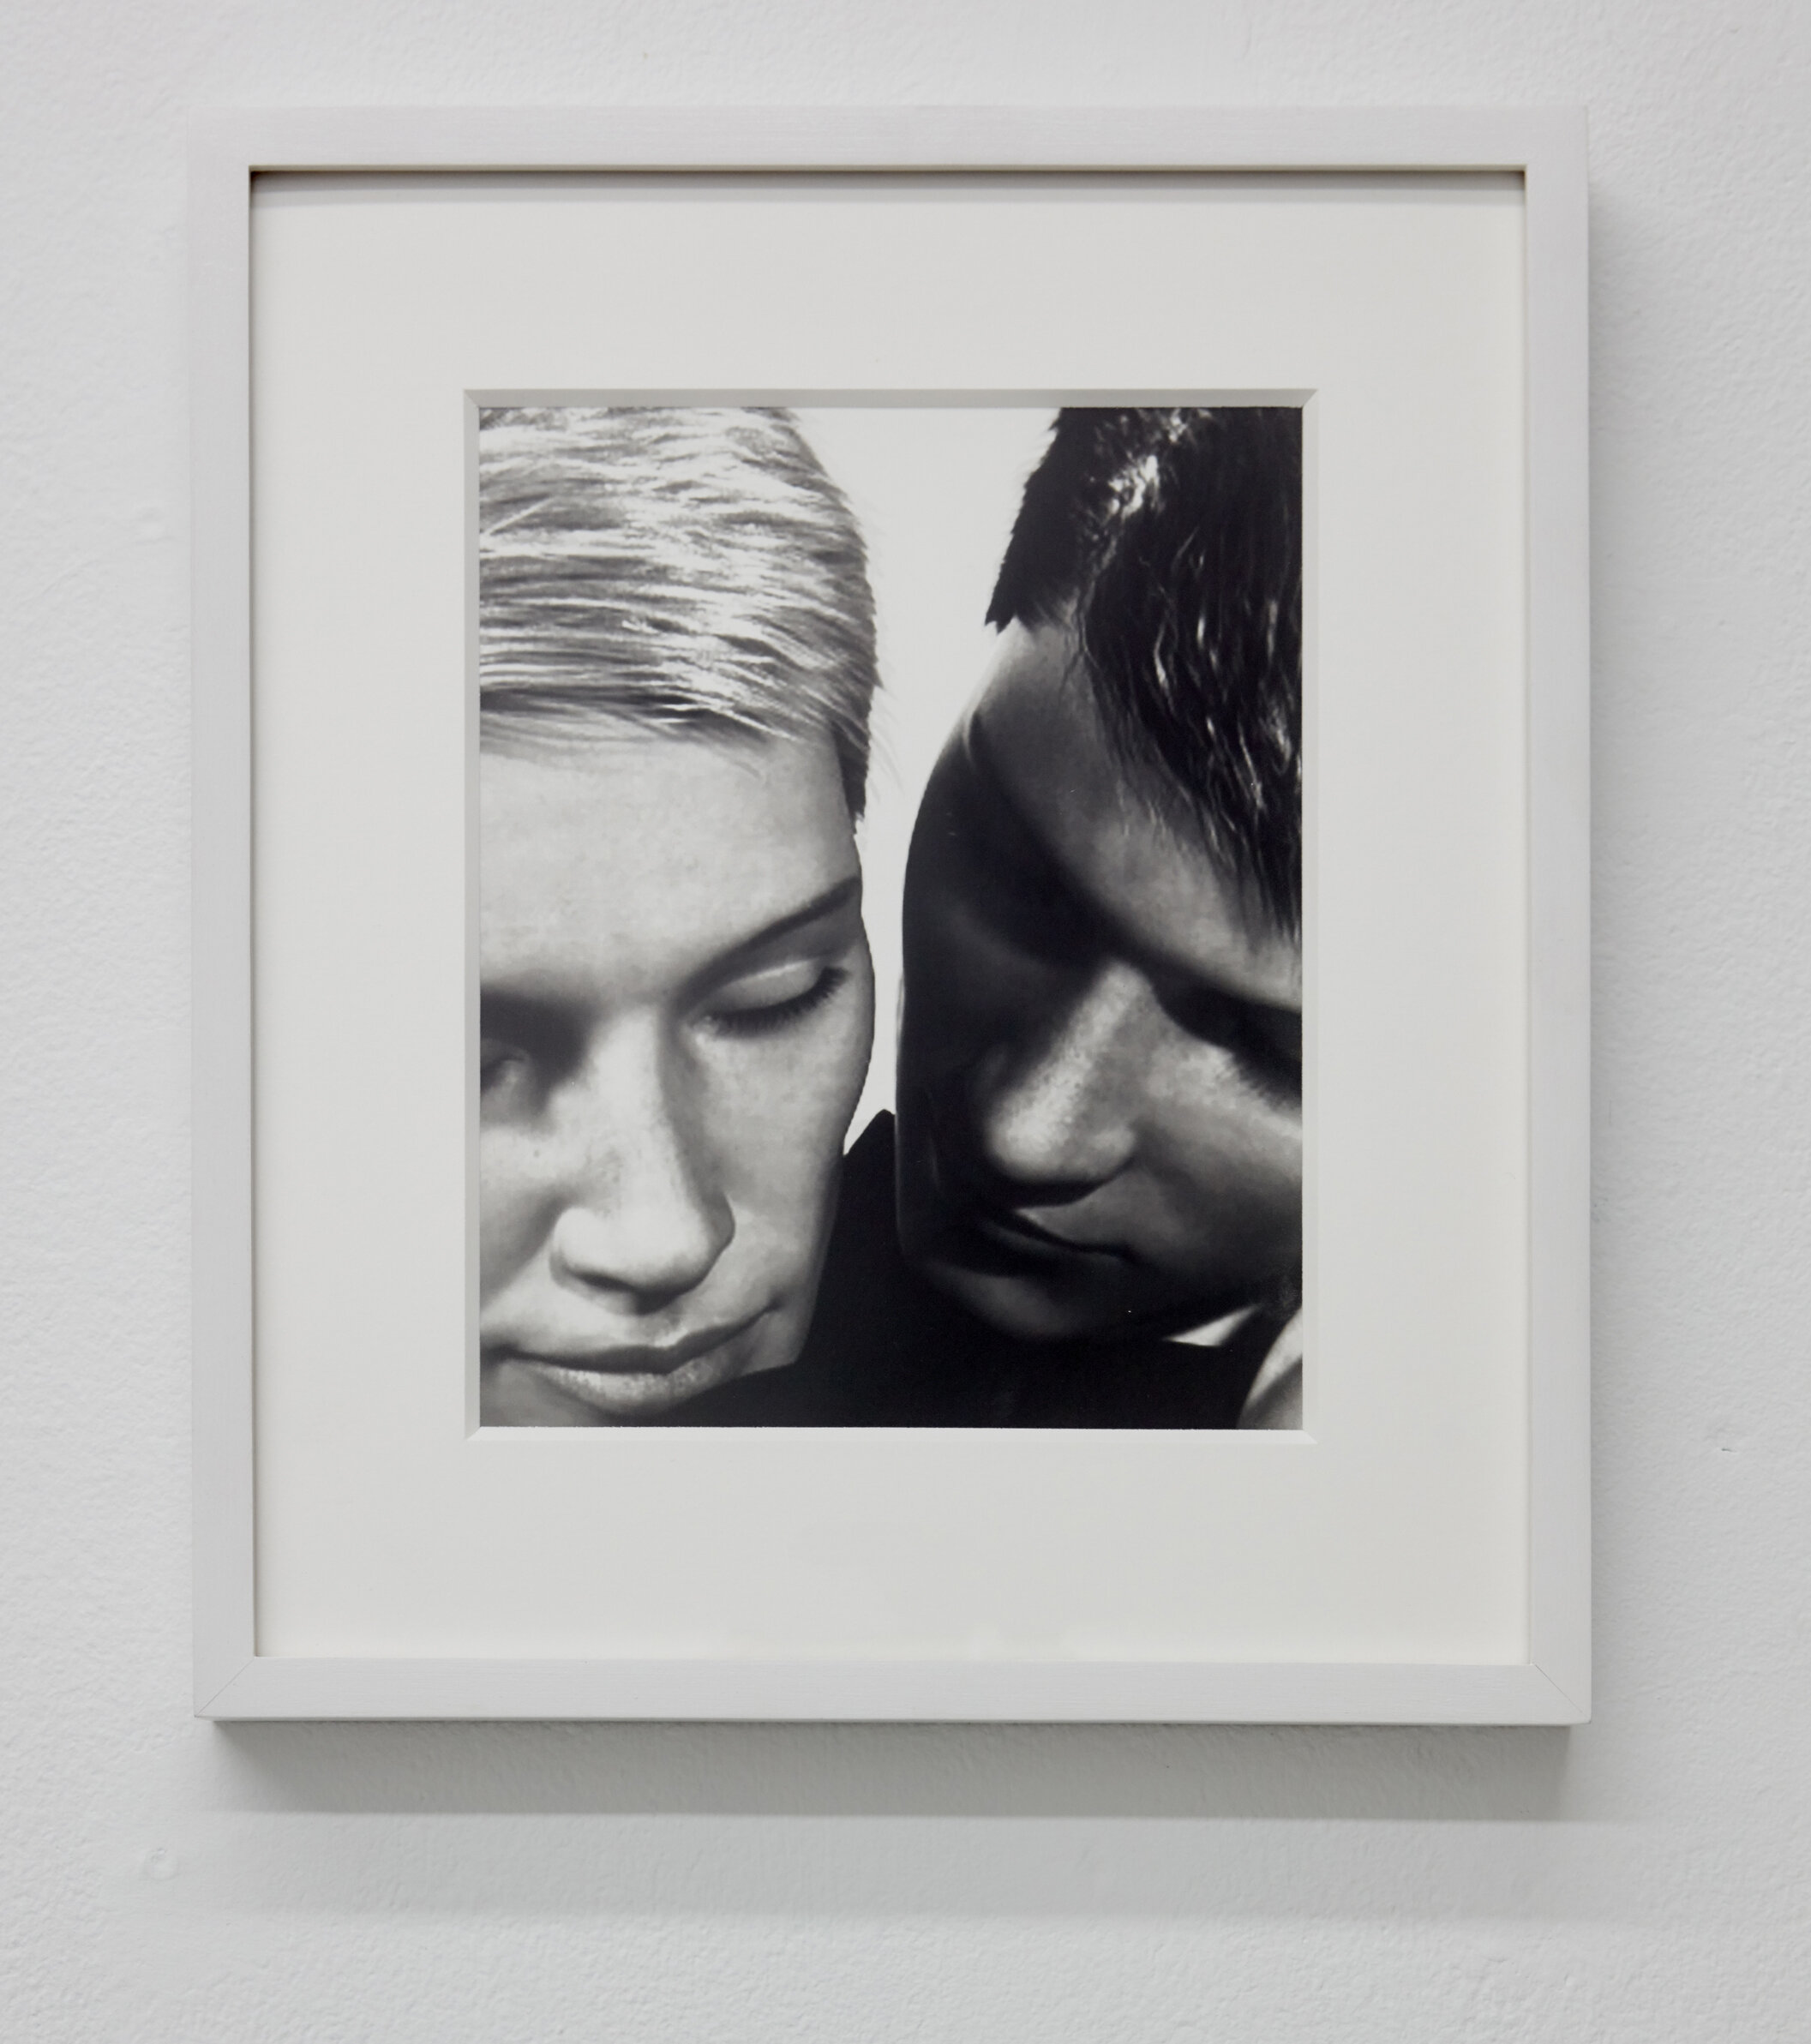   Couple,  2018. Gelatin silver print. 10 x 8 inches. Edition of 3. 